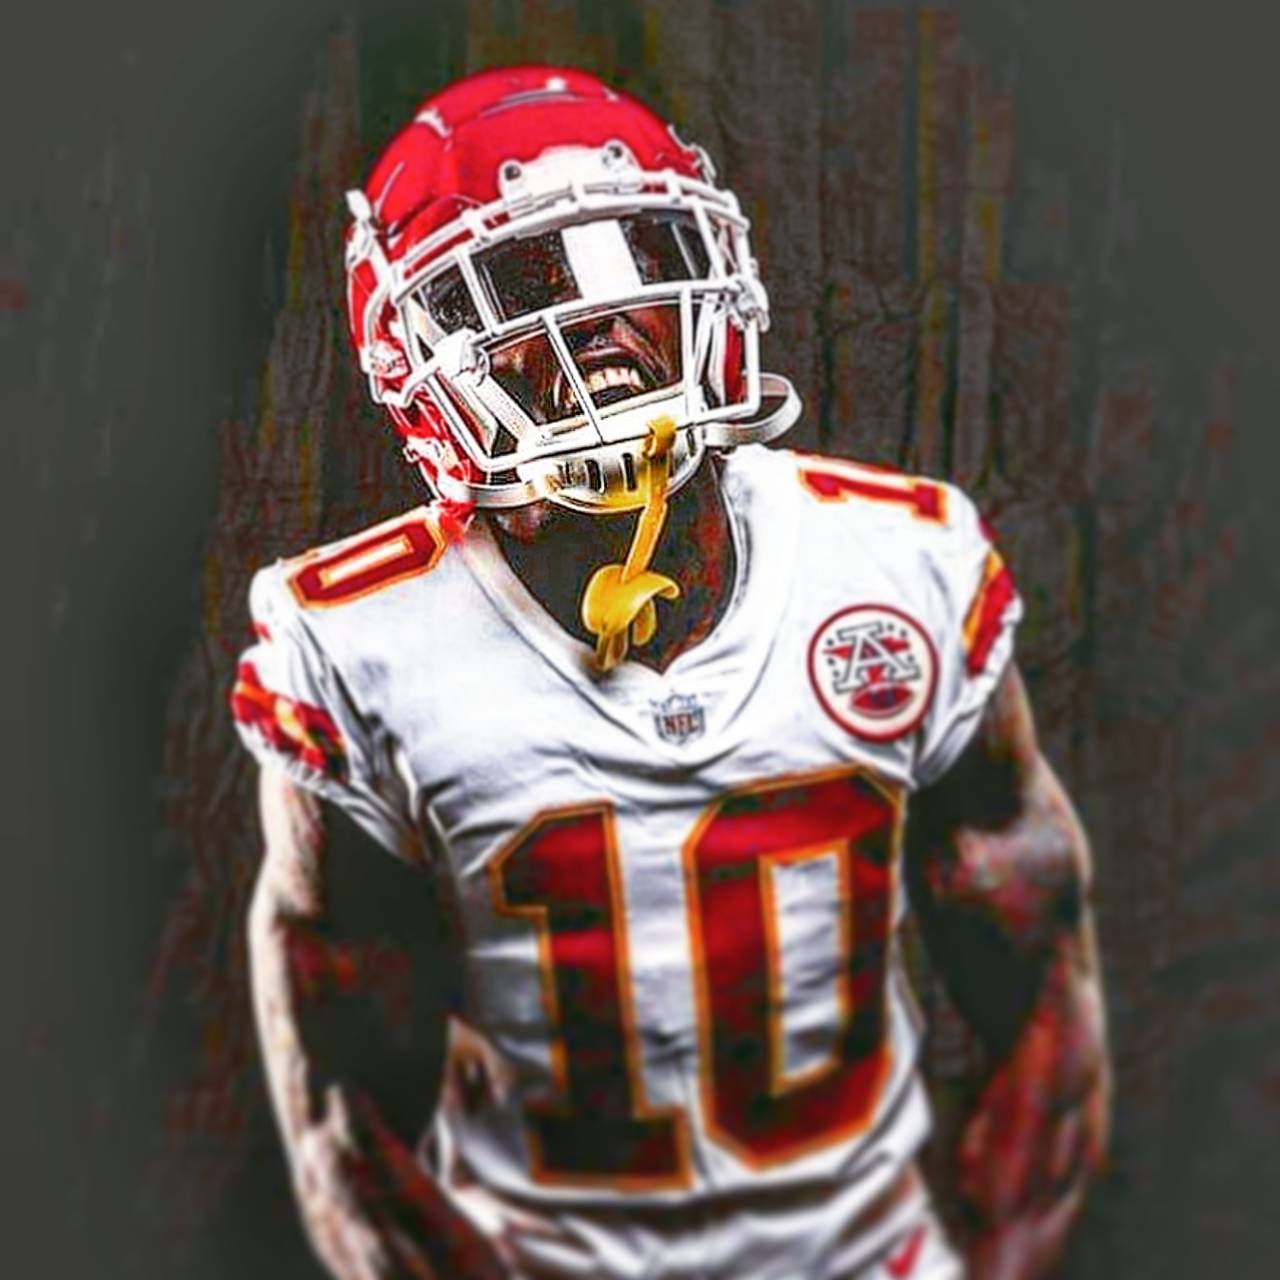 Pro Bowl Tyreek Hill Is Holding Football With One Hand Wearing Red Sports  Dress And Helmet Tyreek Hill HD wallpaper  Peakpx